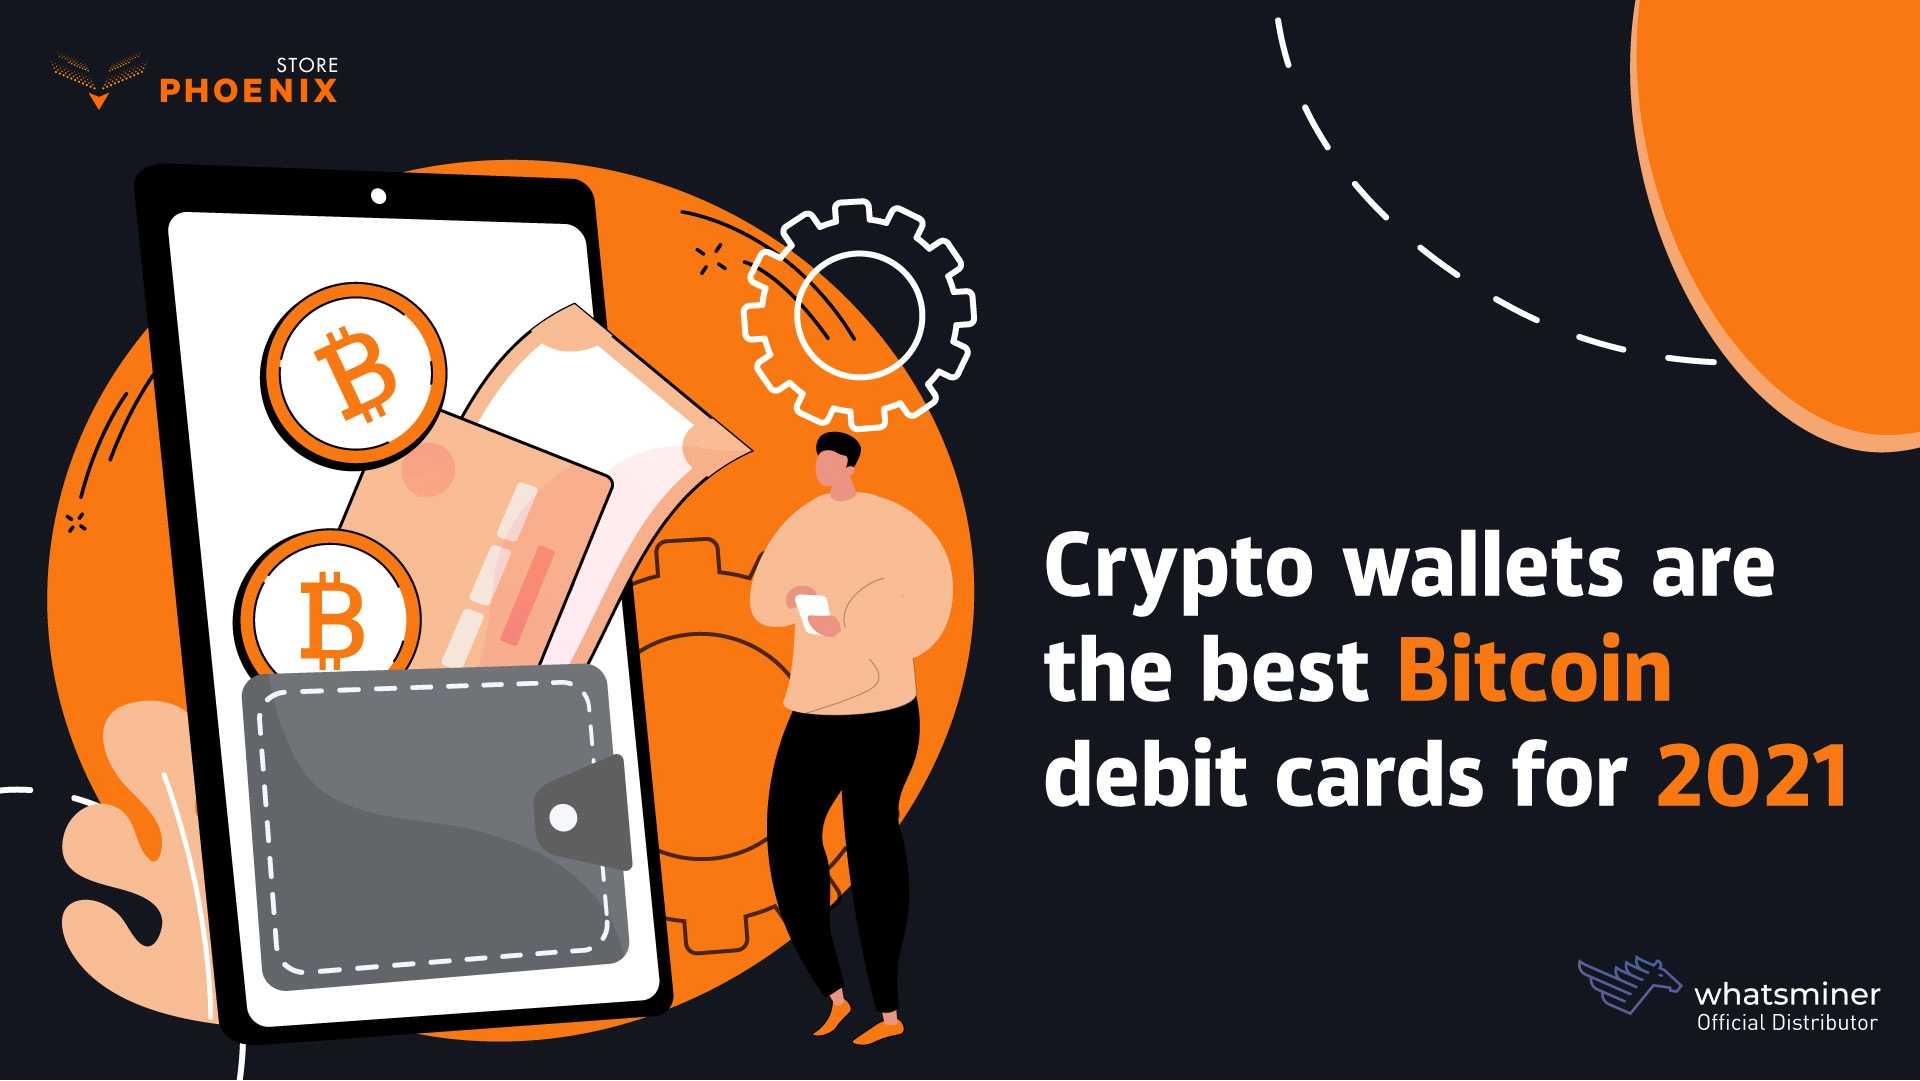 Crypto wallets are the best Bitcoin debit cards for 2021